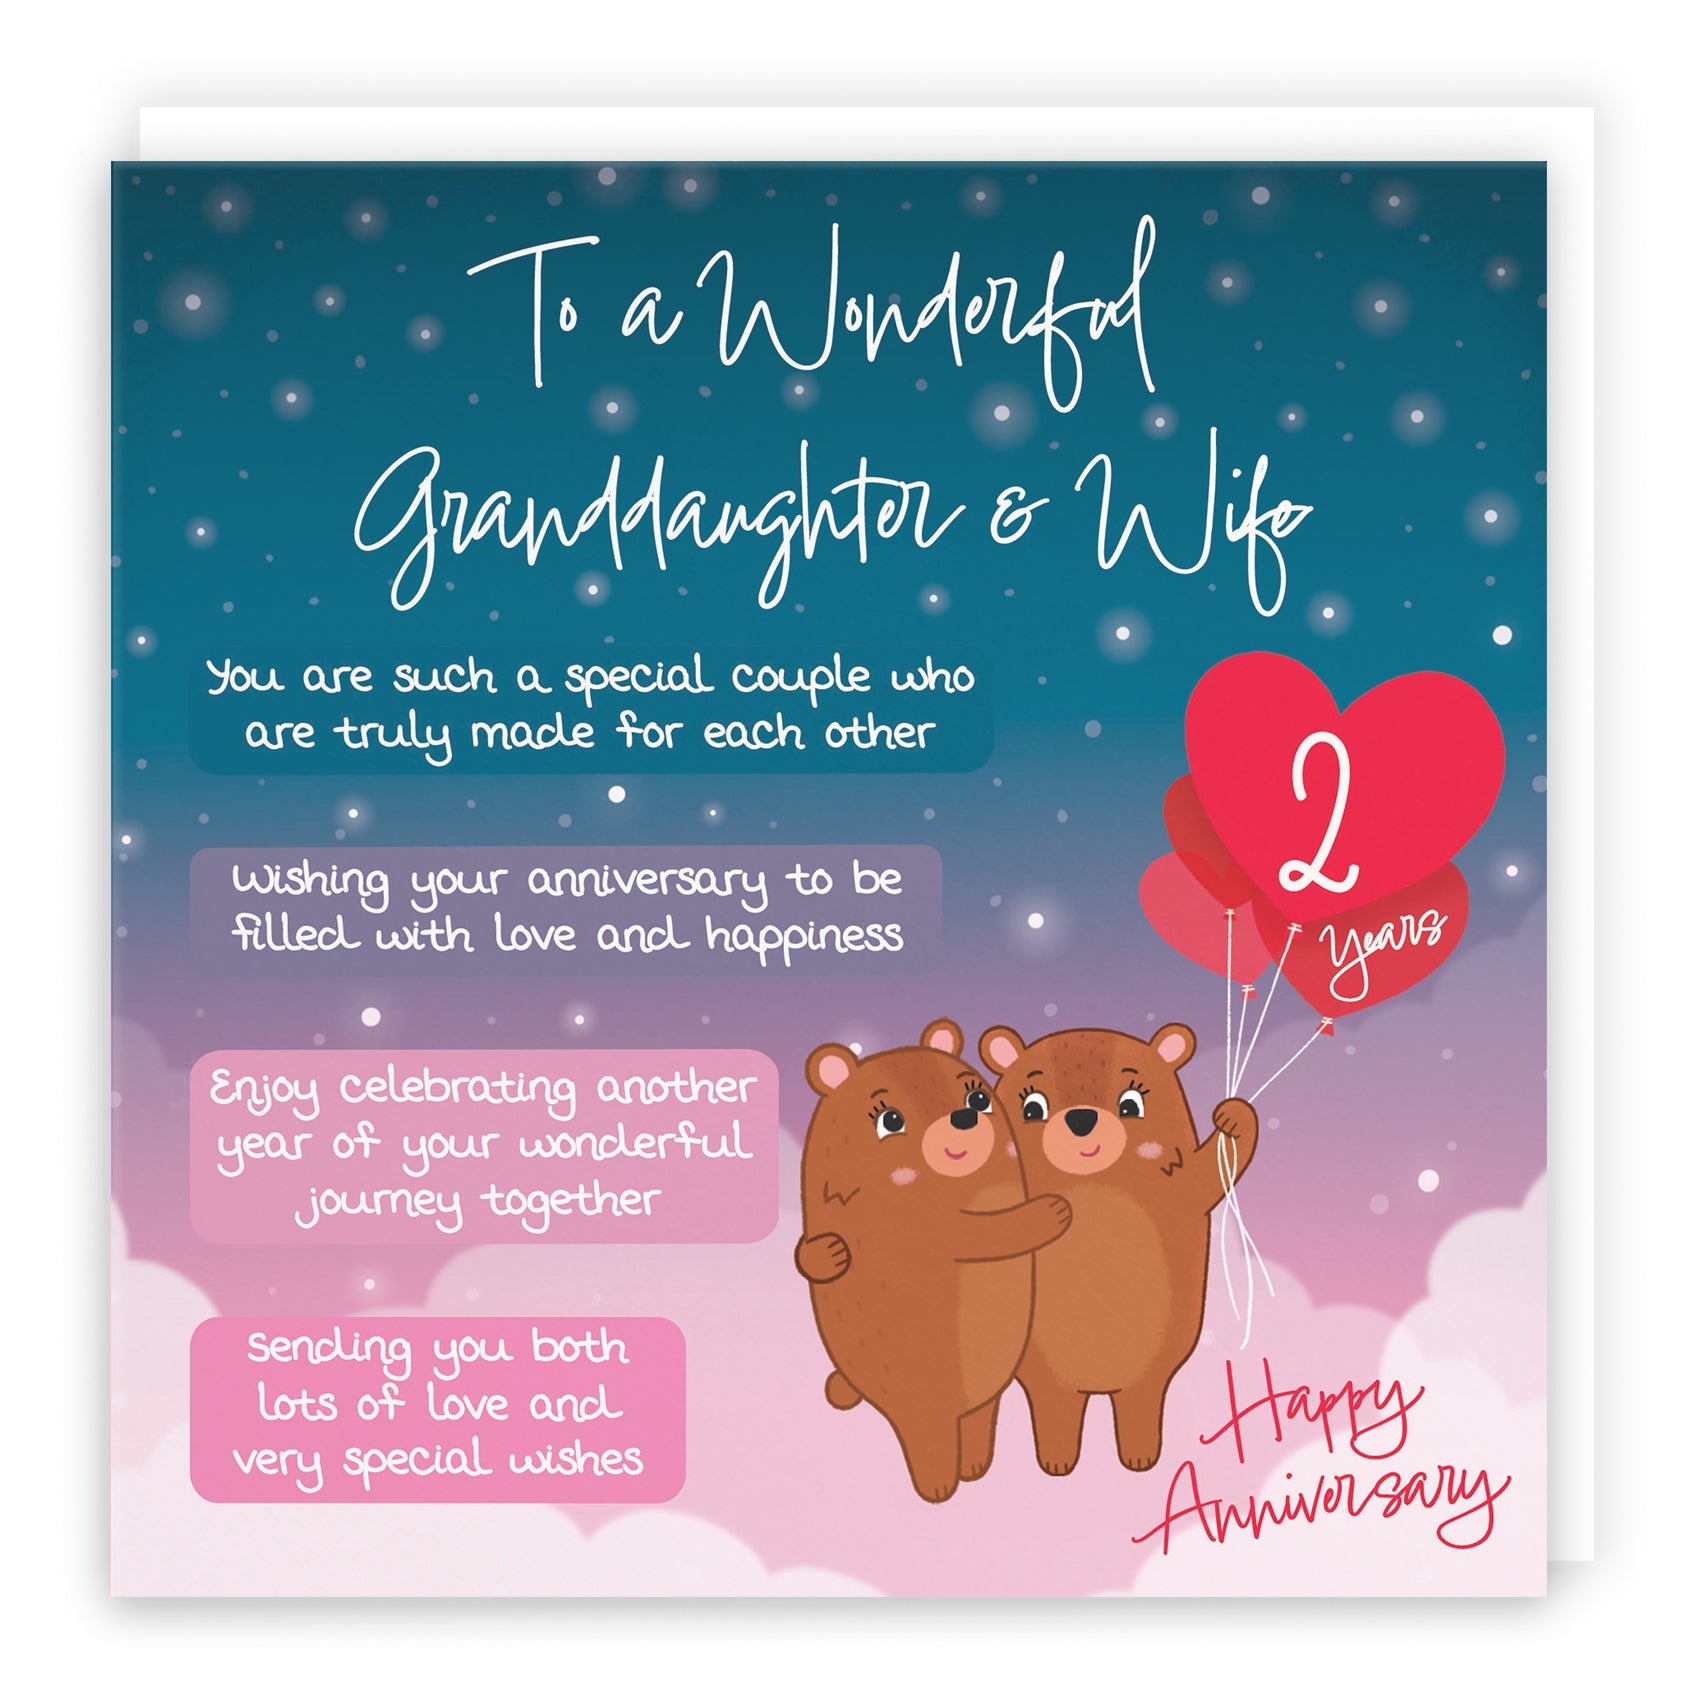 Granddaughter And Wife 2nd Anniversary Card Starry Night Cute Bears